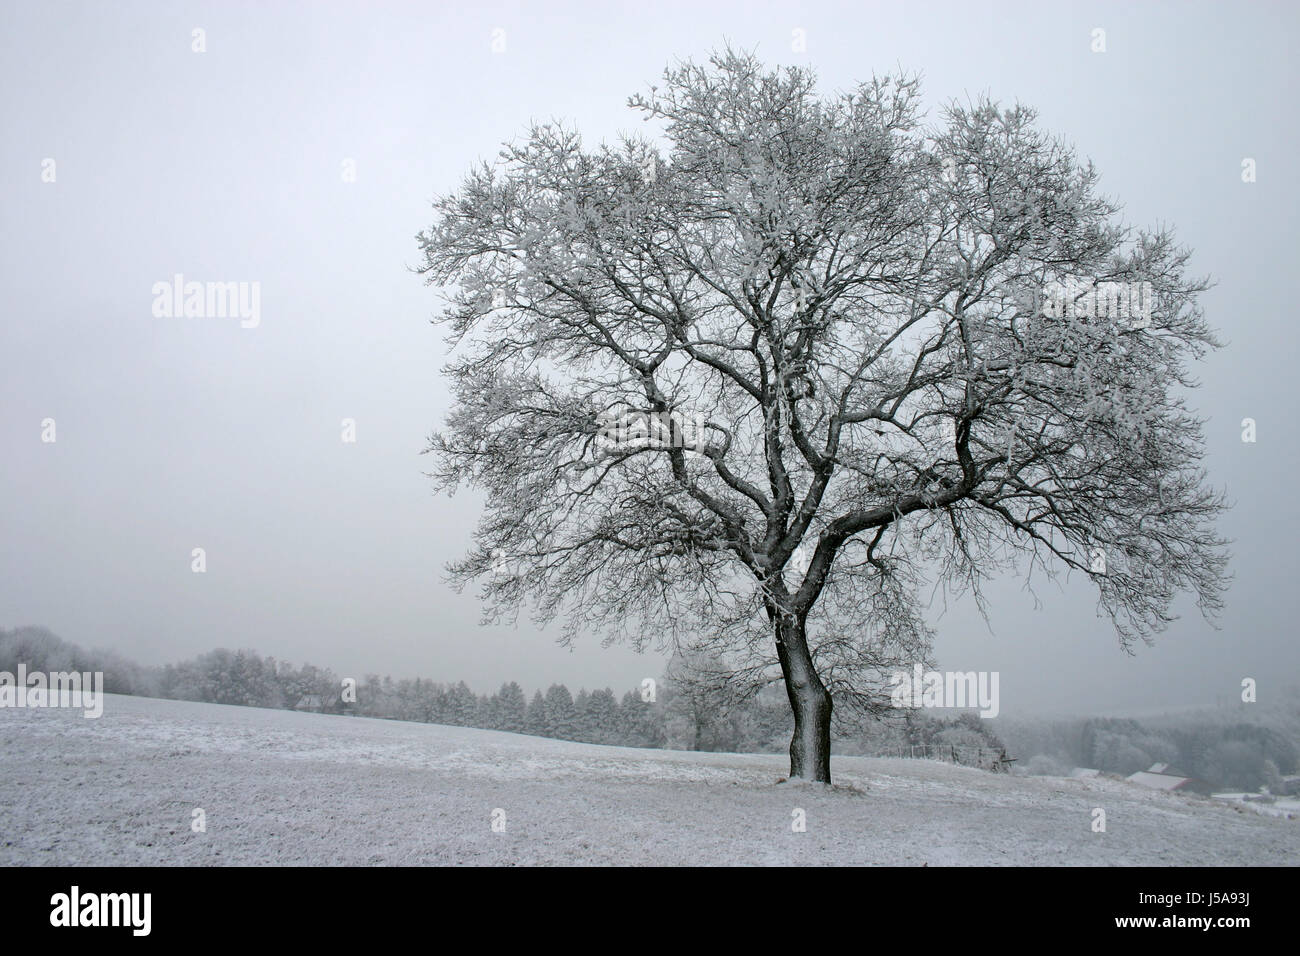 big large enormous extreme powerful imposing immense relevant tree winter cold Stock Photo